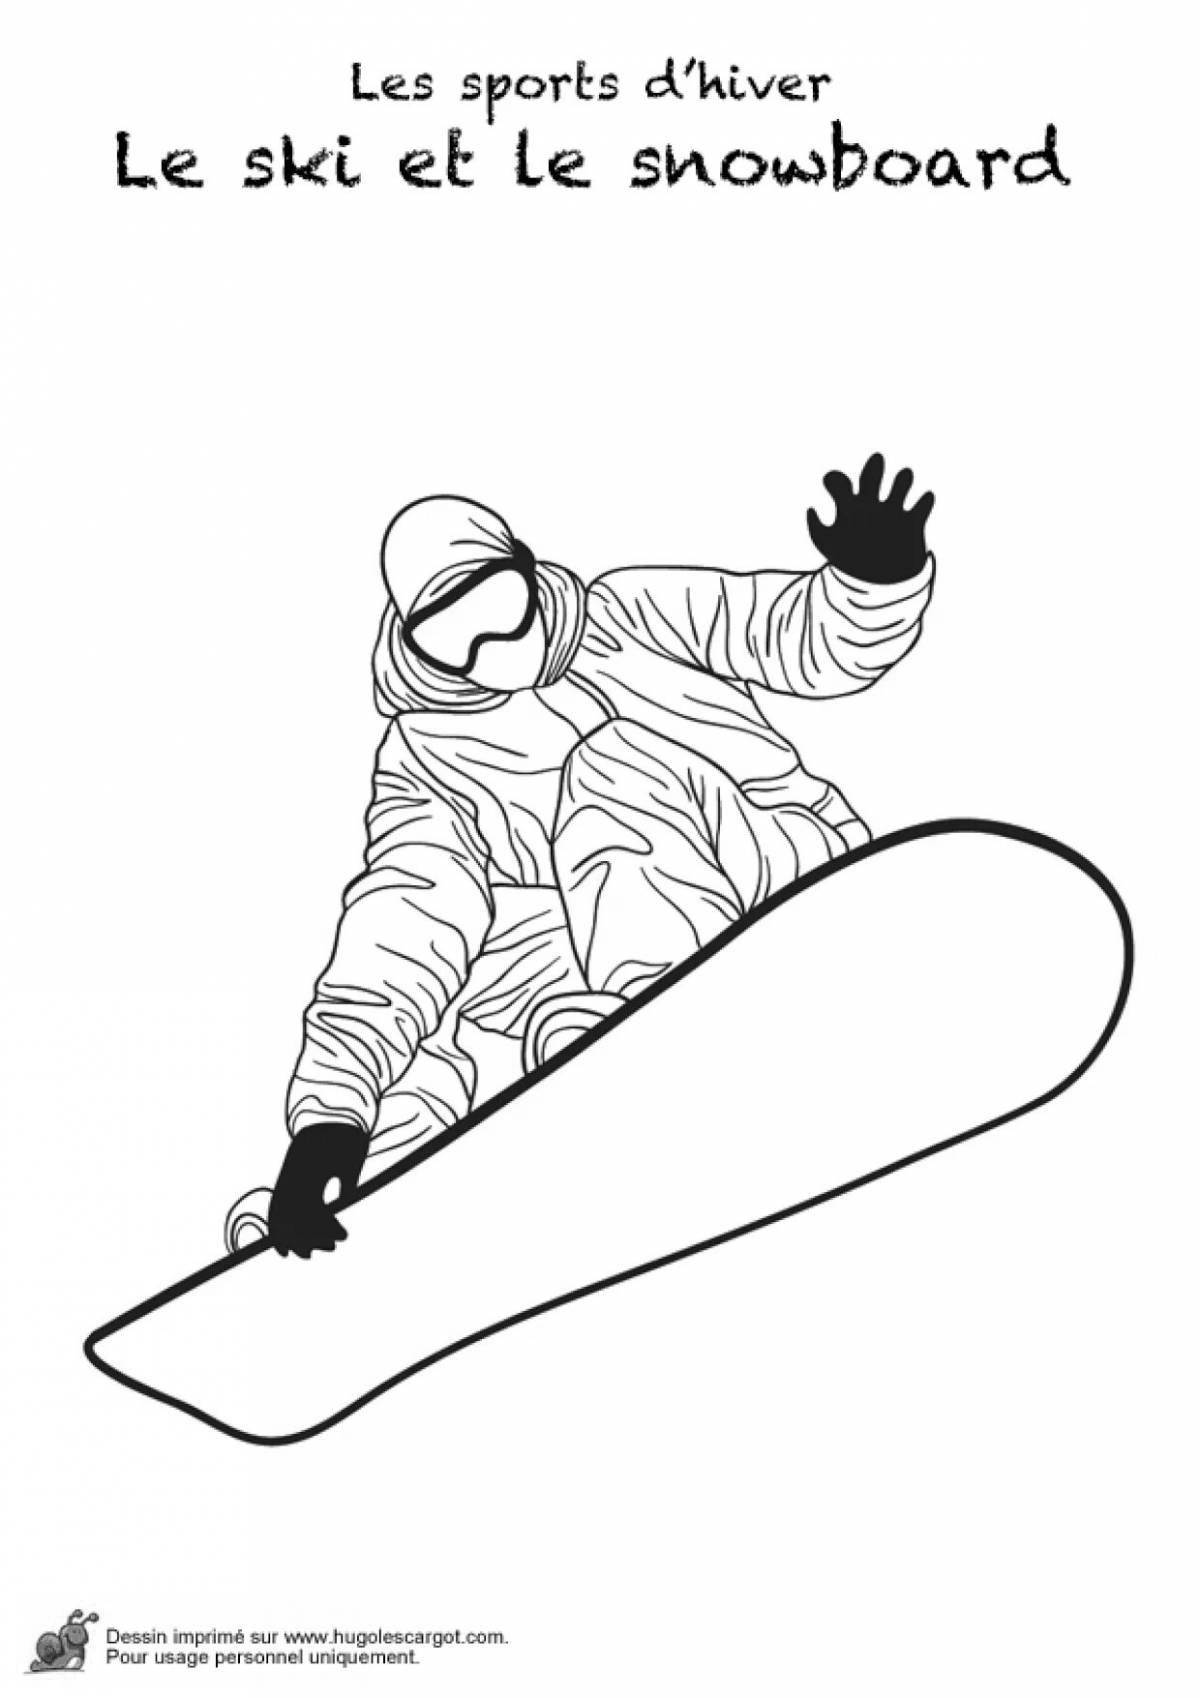 Courageous snowboarder coloring pages for kids